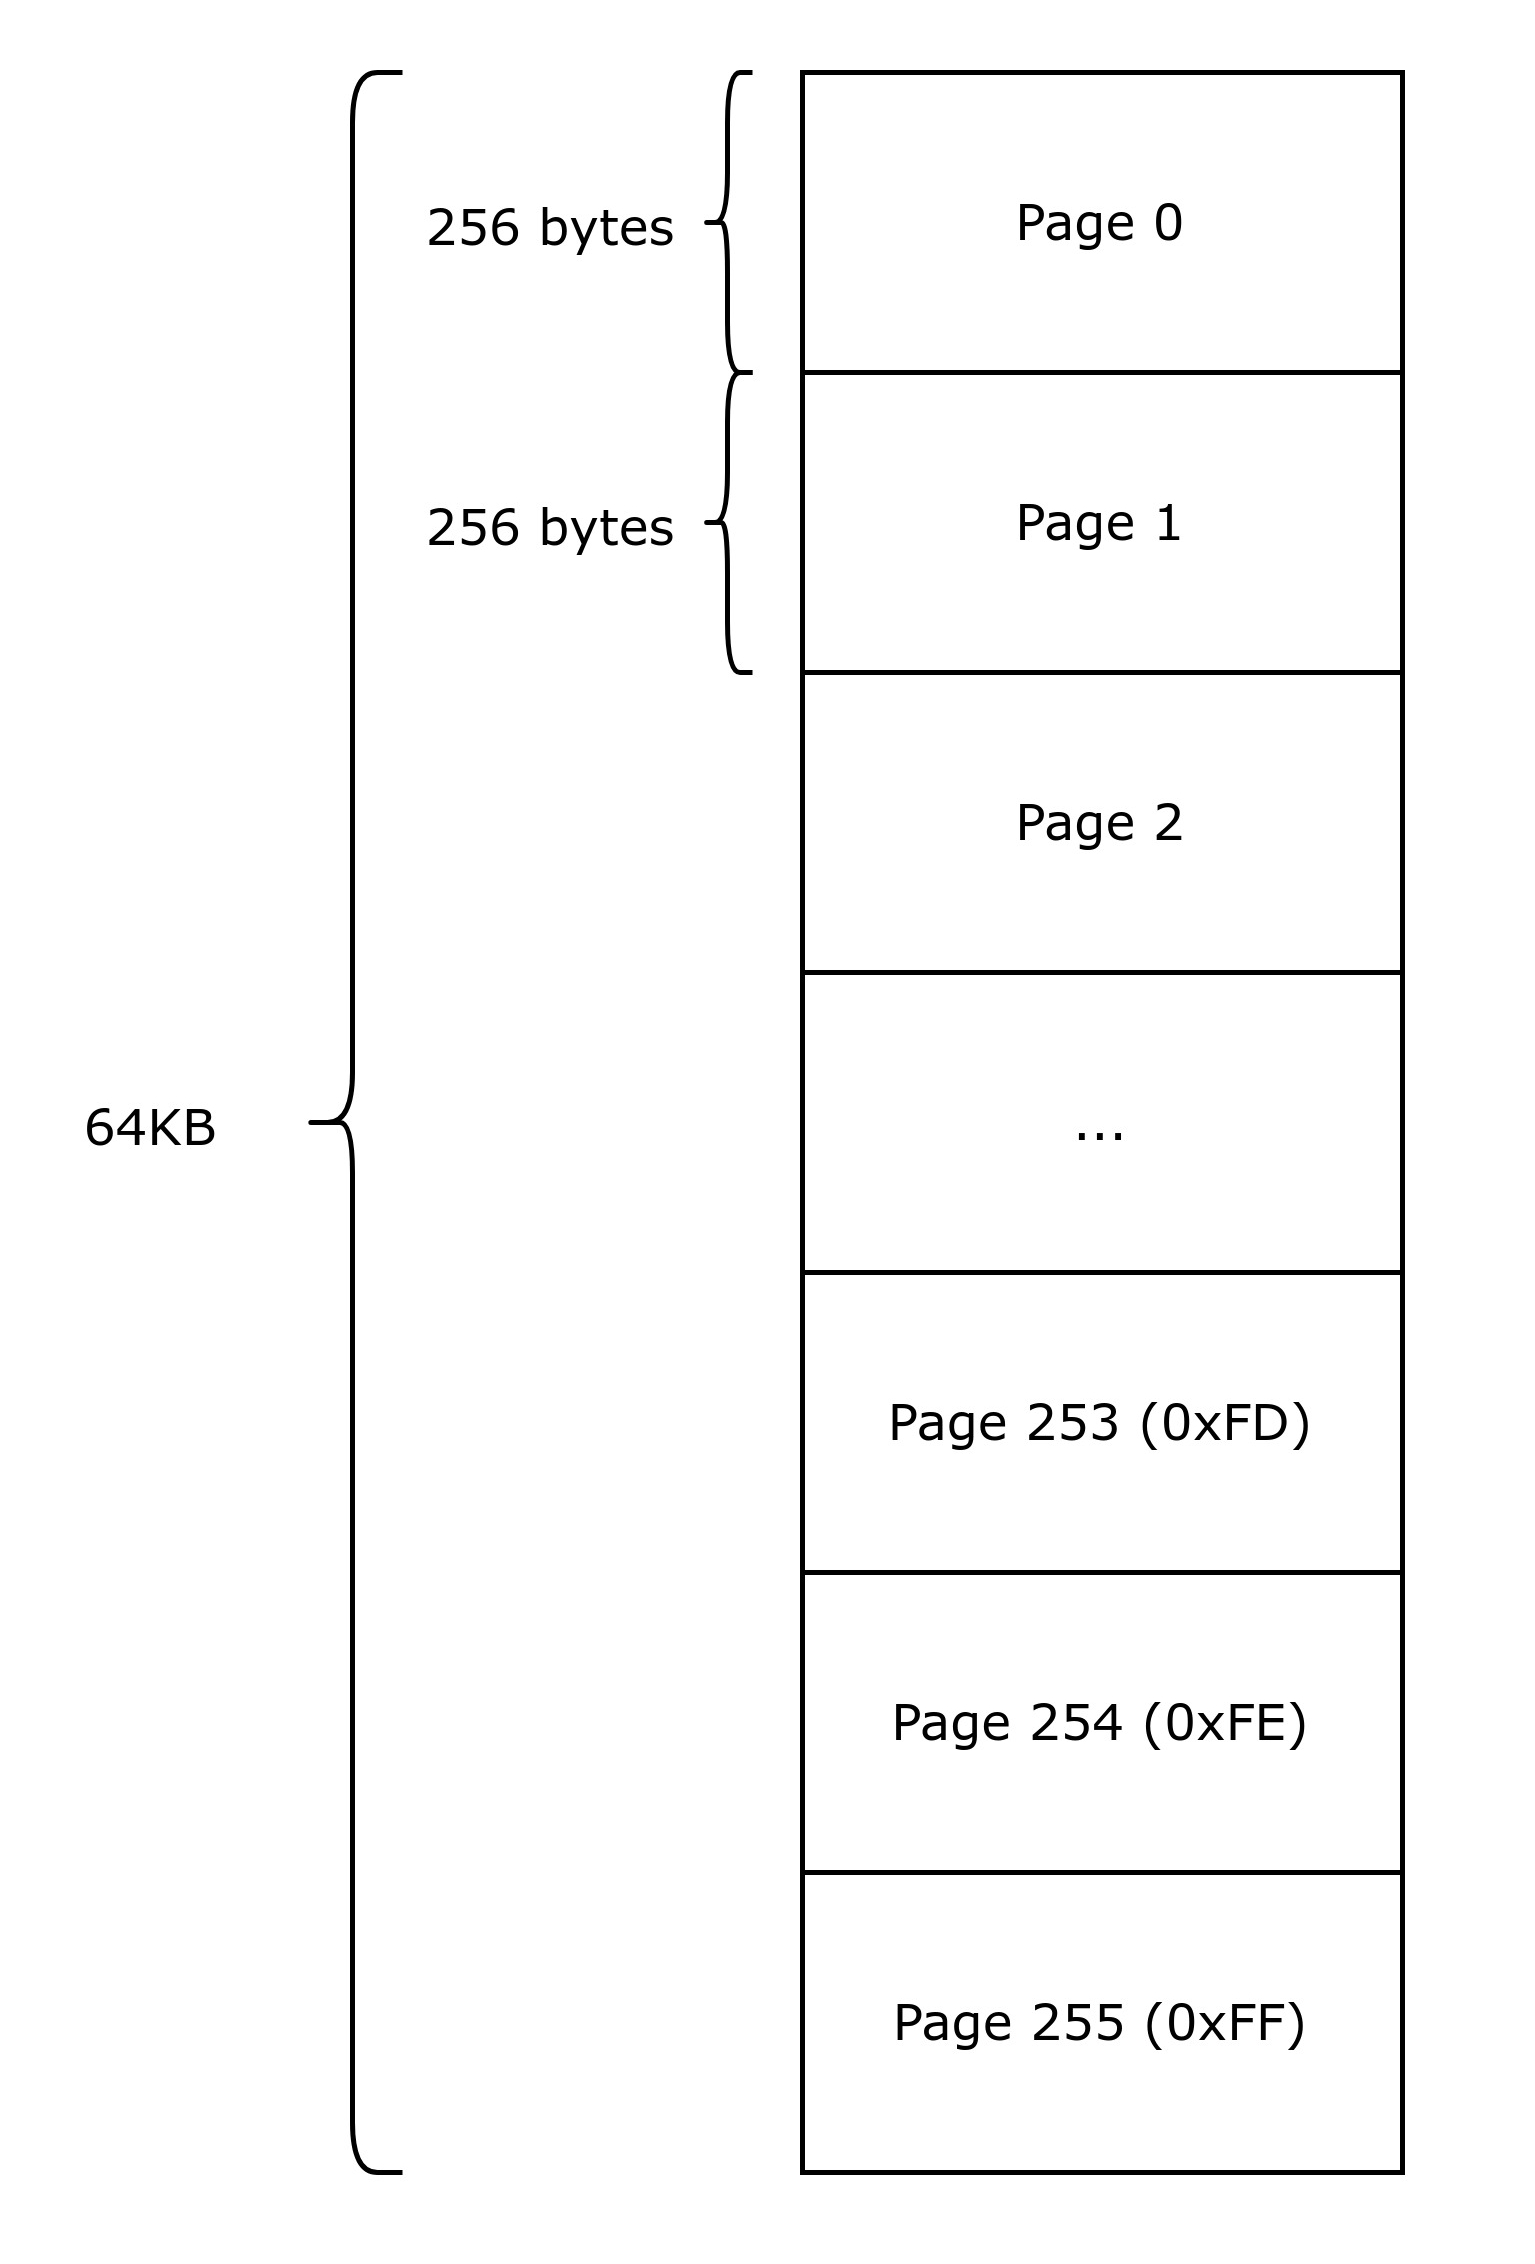 File System Pages